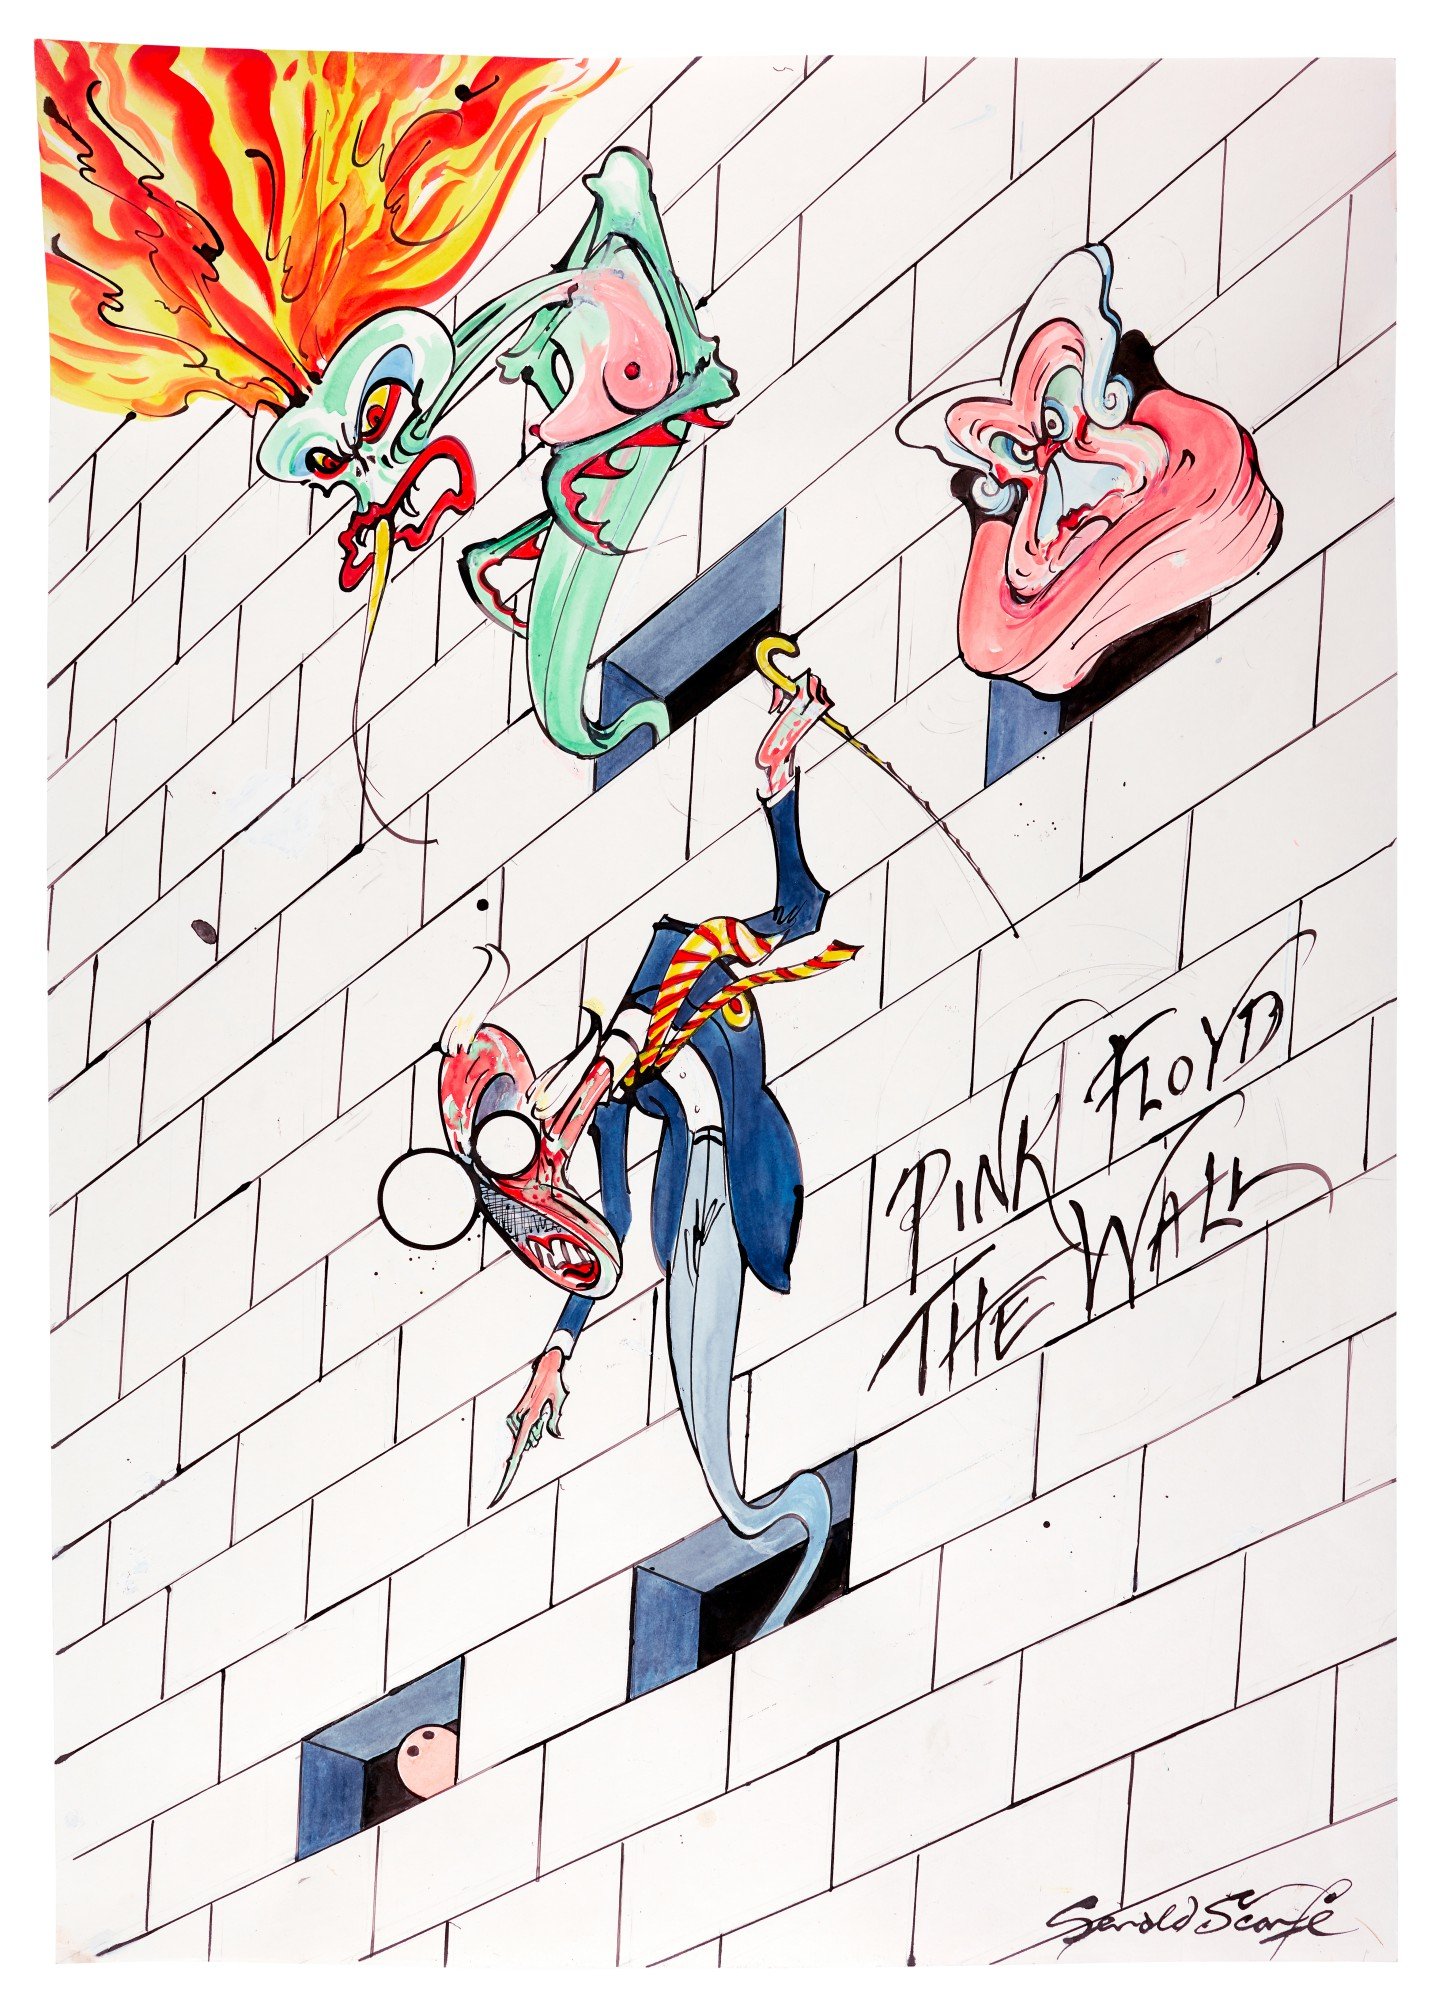 The Art of Pink Floyd The Wall - New Gerald Scarfe Book Out Nov 2021